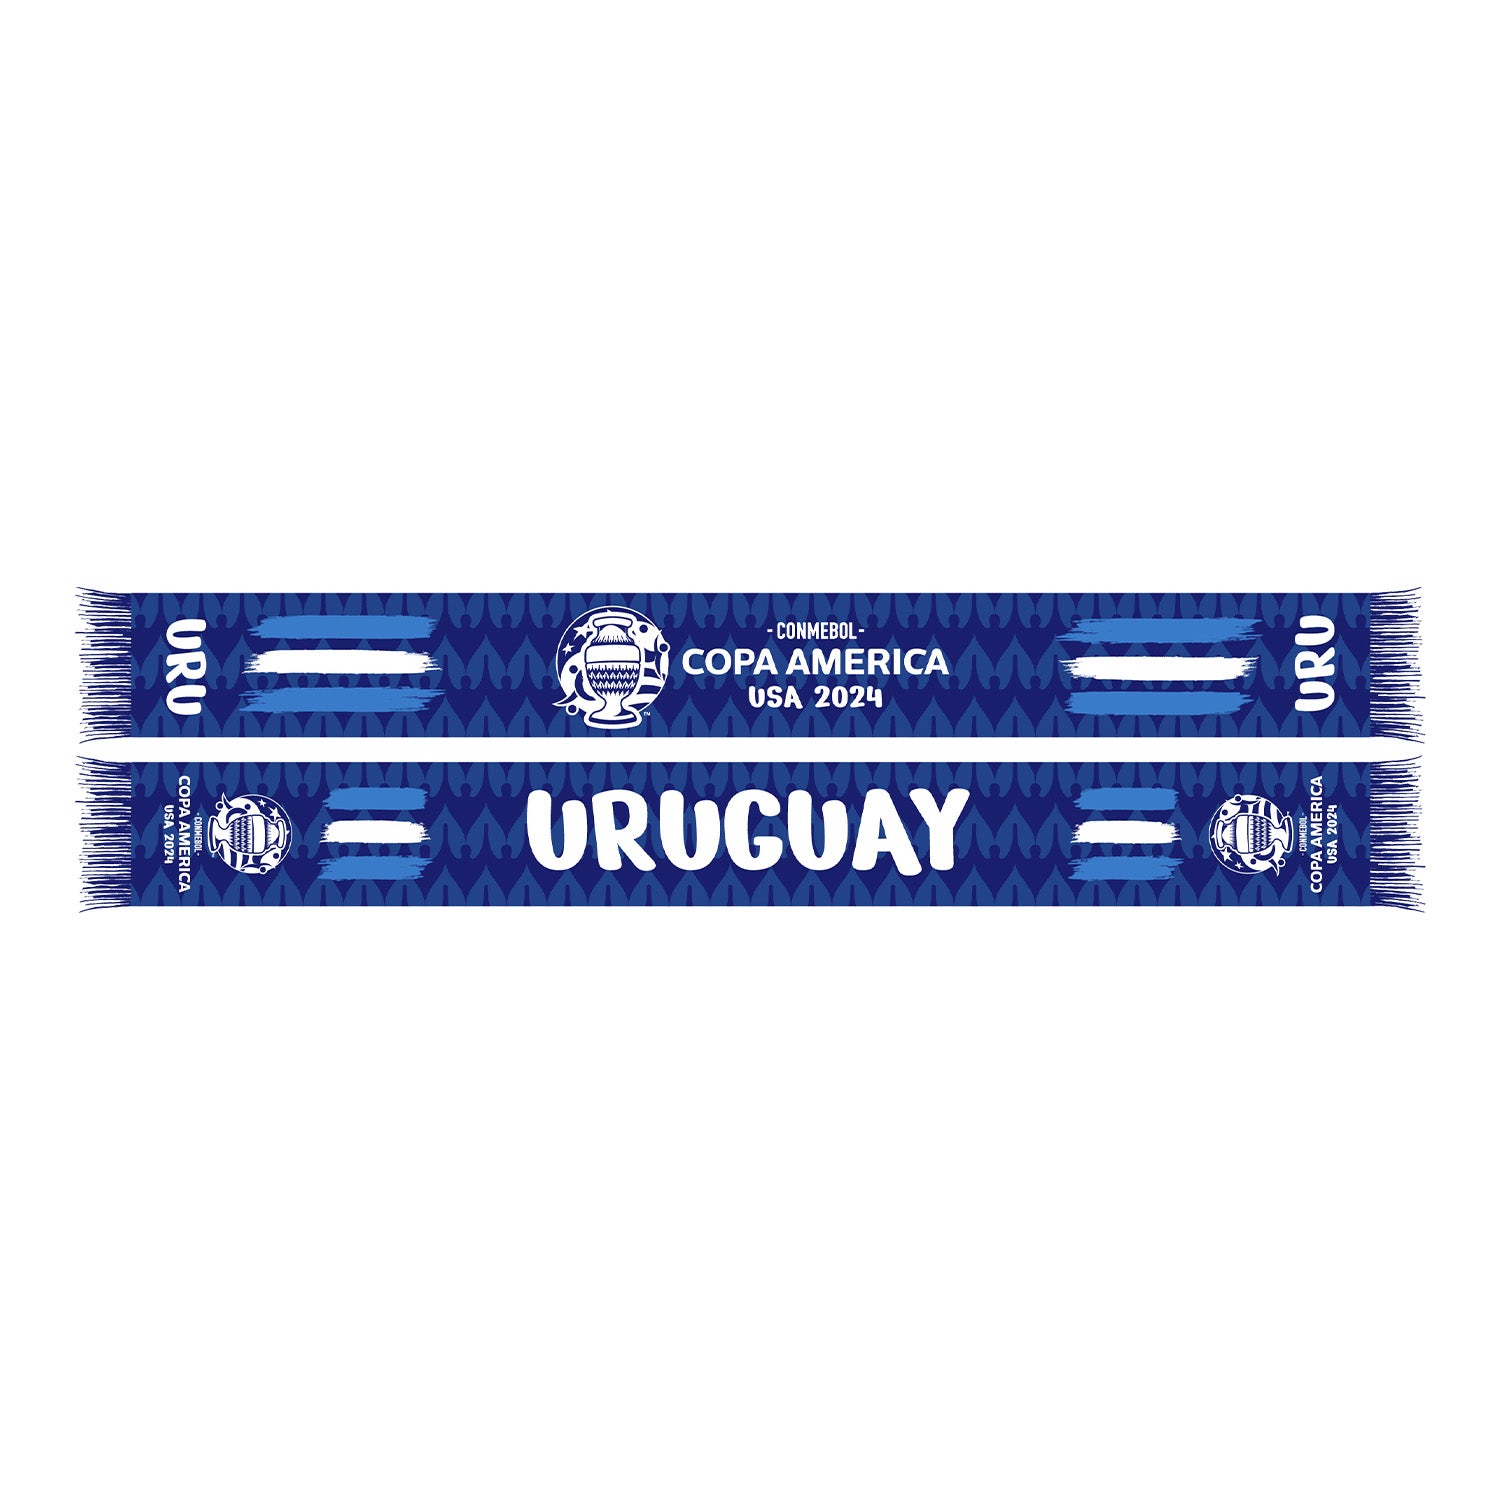 Uruguay COPA America Scarf - Front and Back View